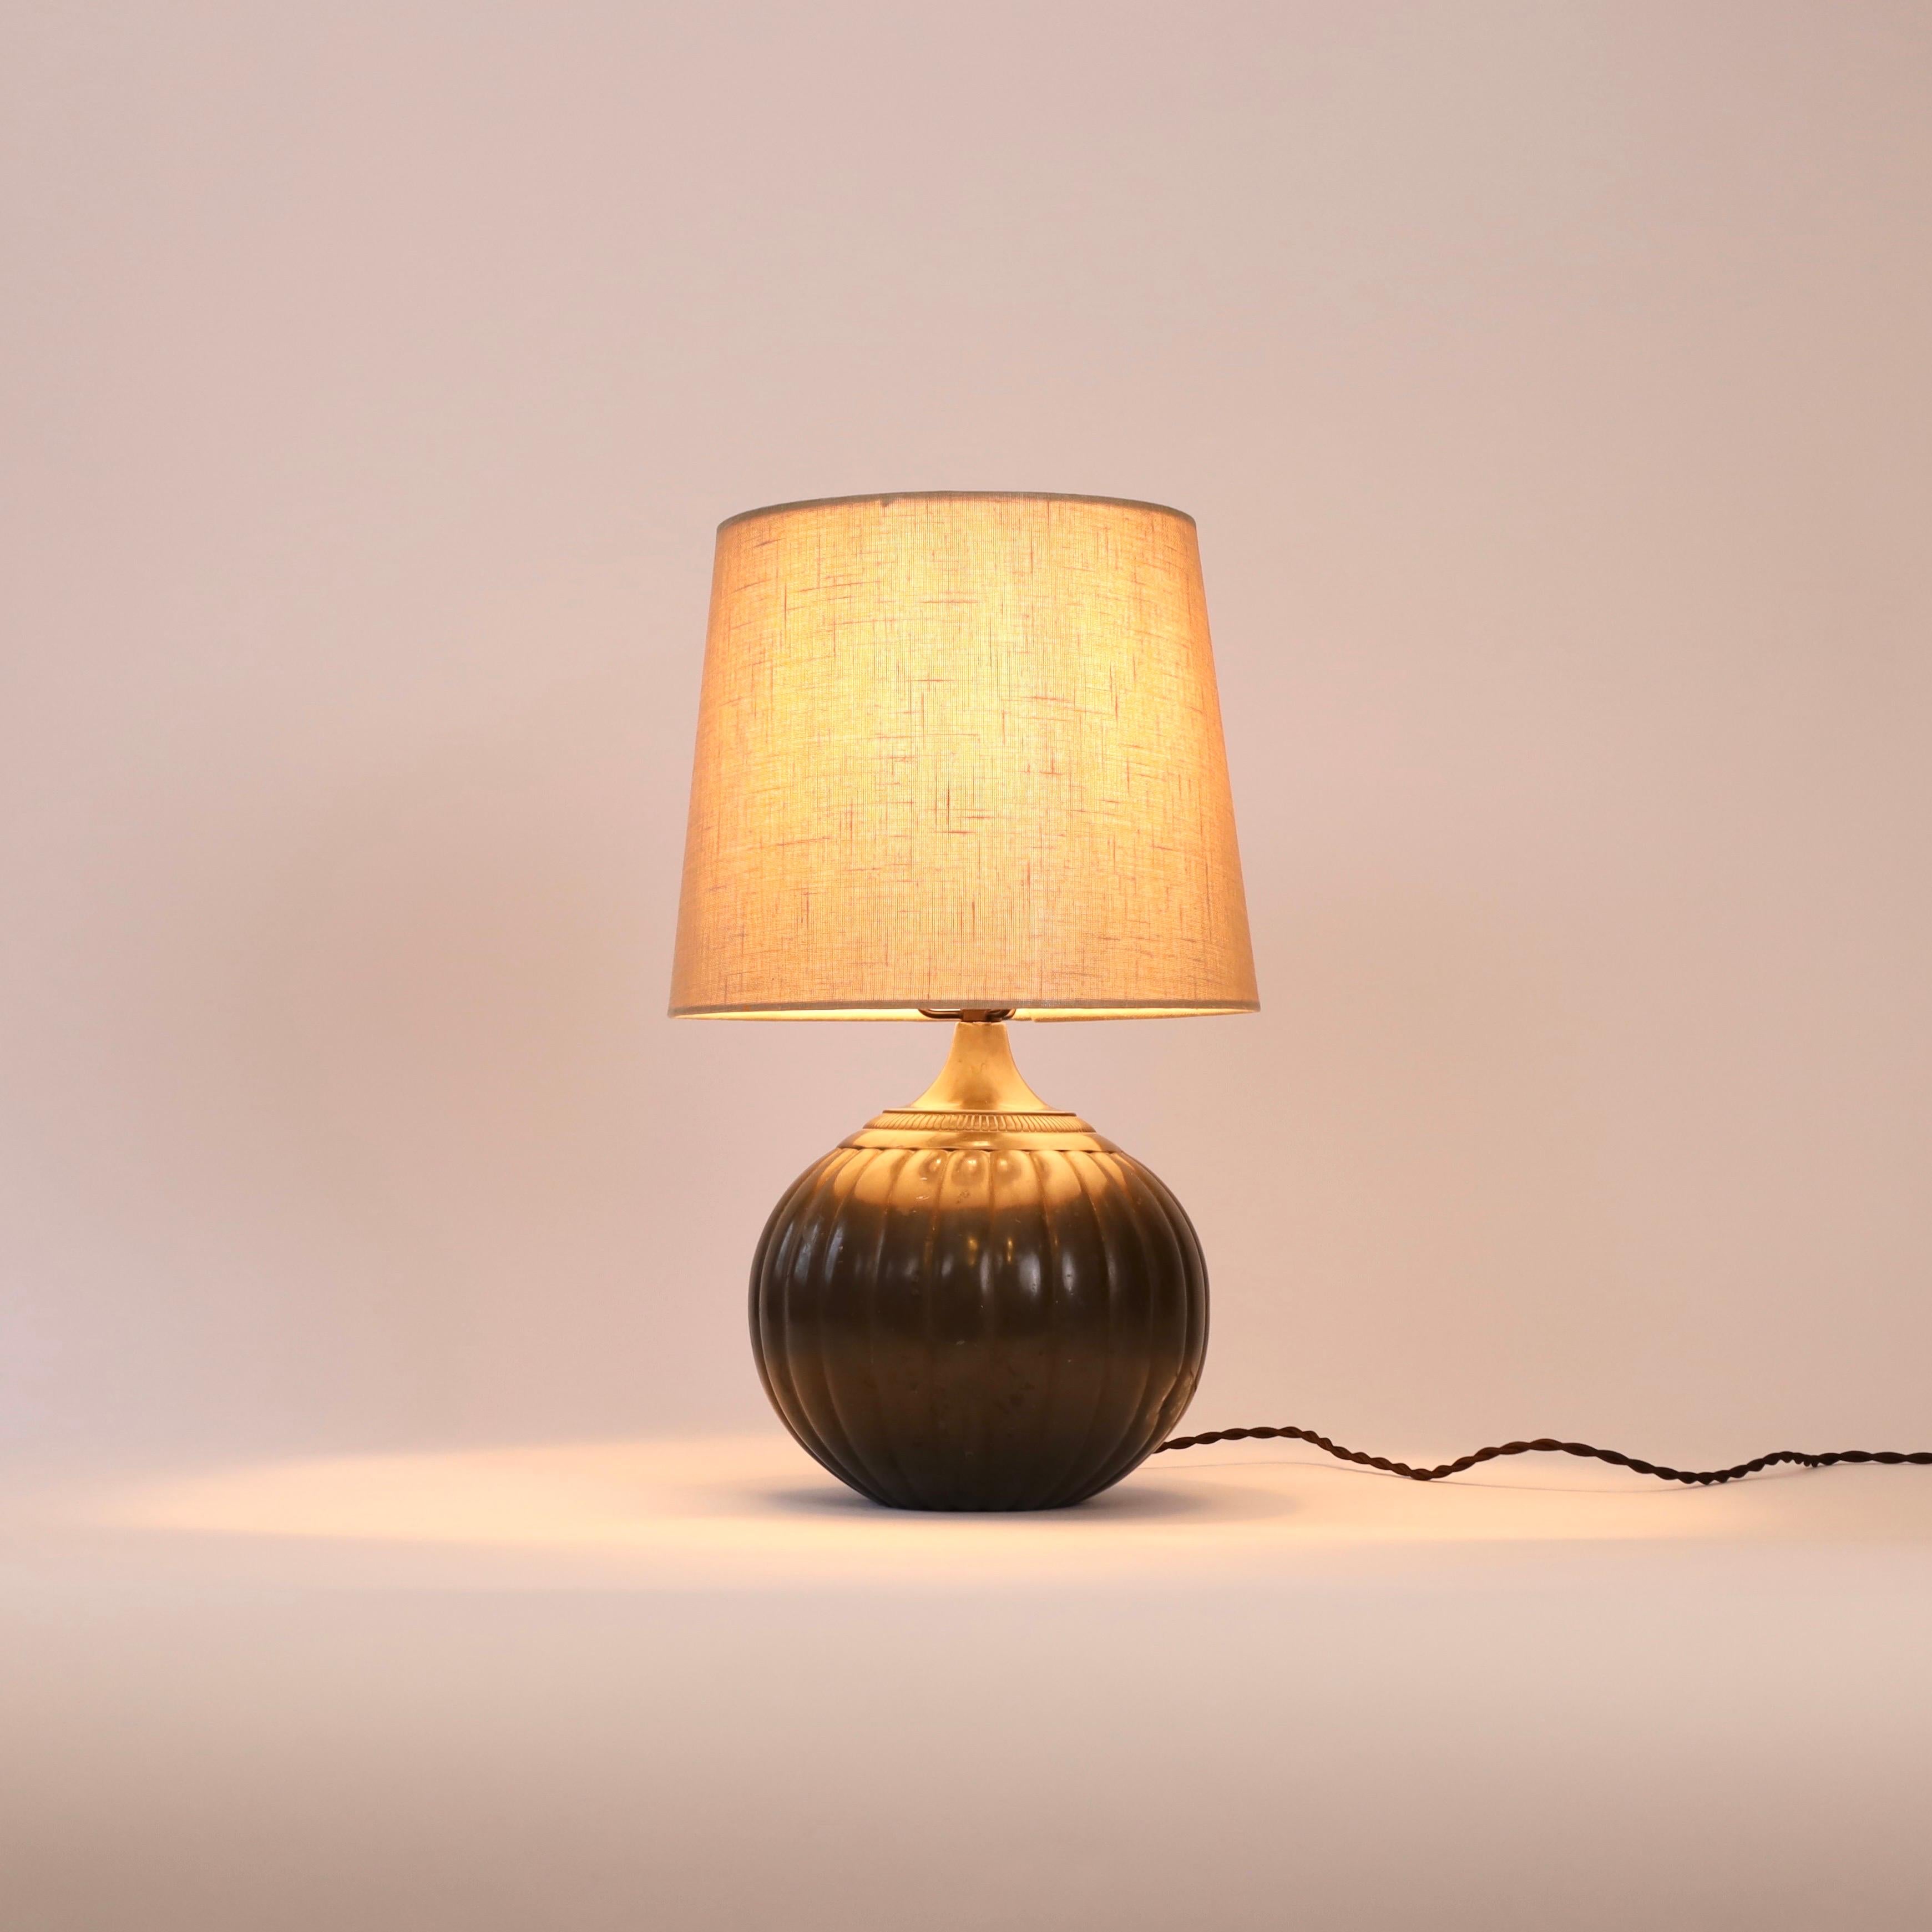 Round table lamp by Just Andersen, 1930s, Denmark In Fair Condition For Sale In Værløse, DK